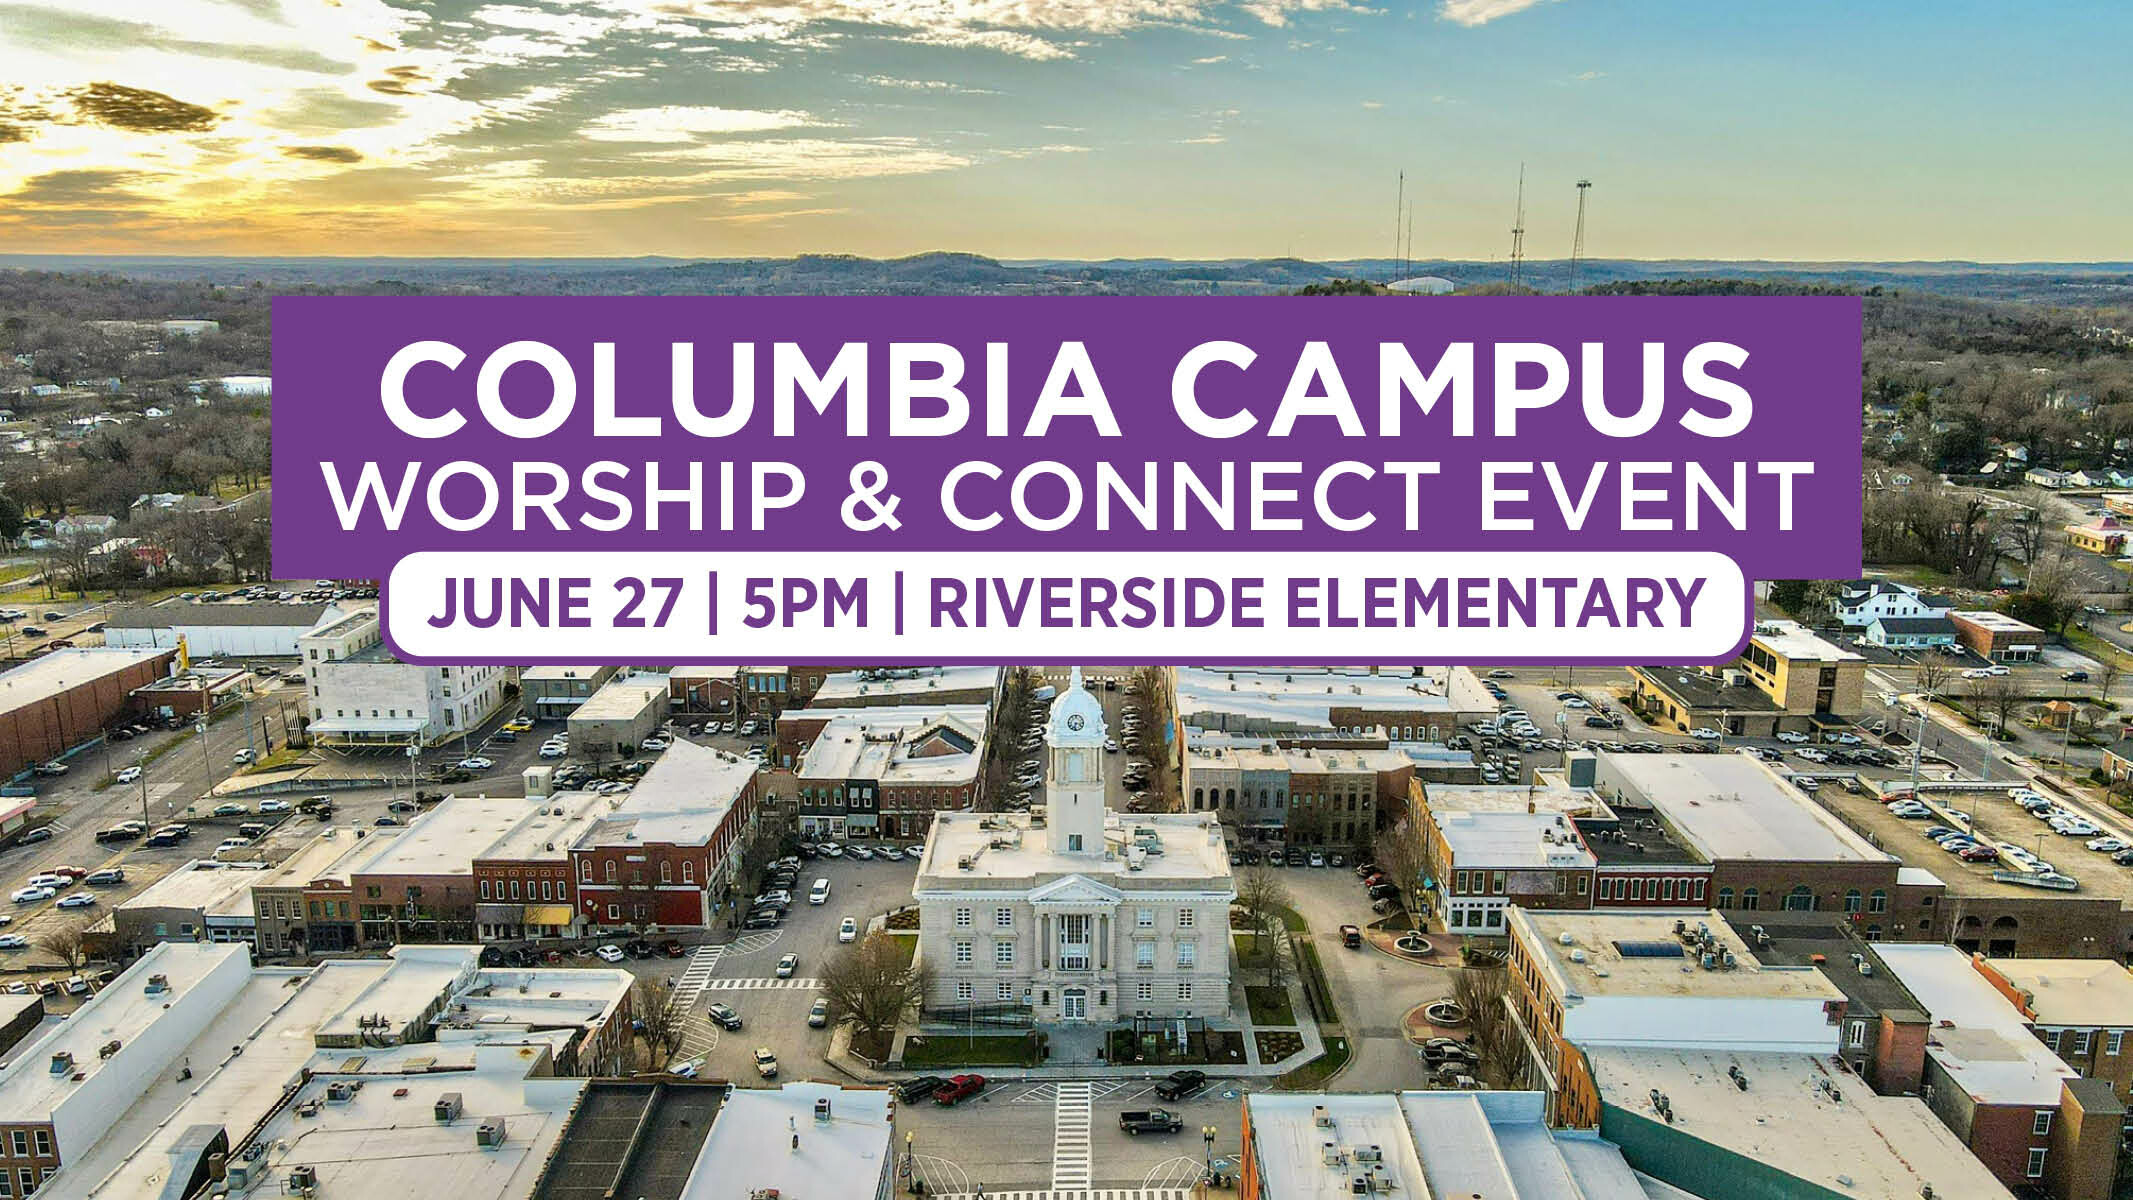 Columbia Campus Worship & Connect Event